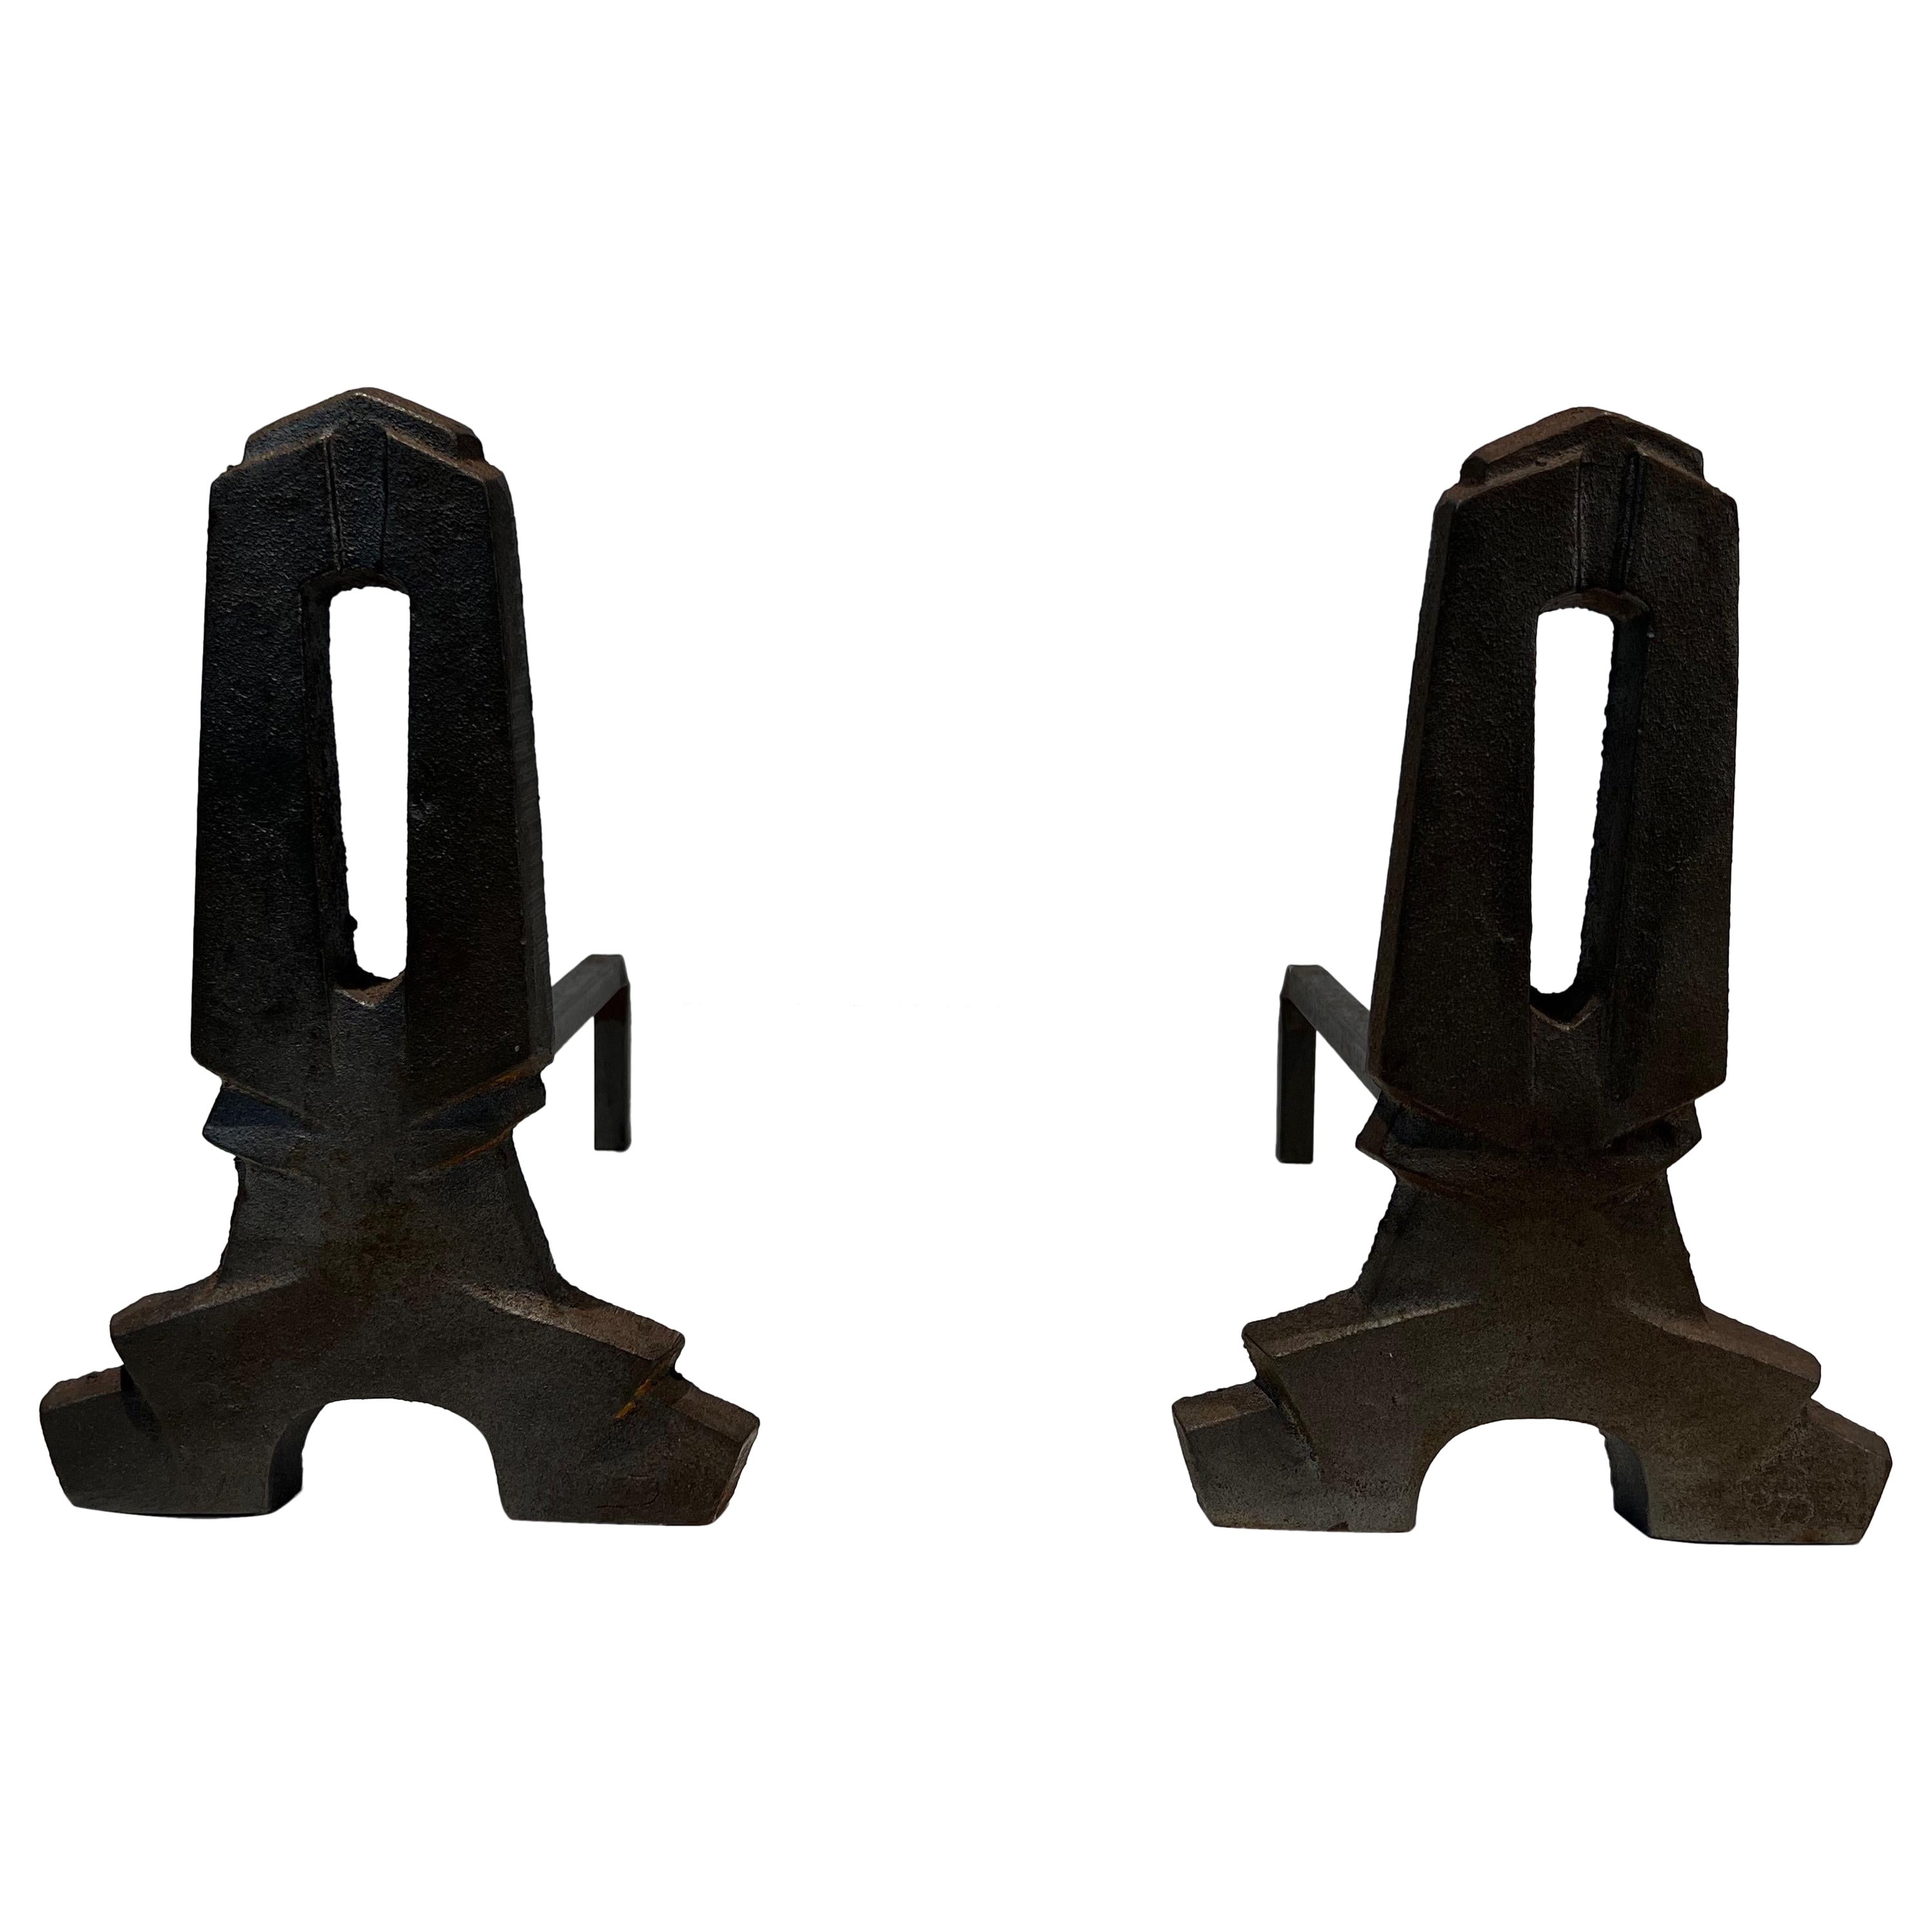 Pair of modernist cast iron and wrought iron andirons. French work. Circa 1940